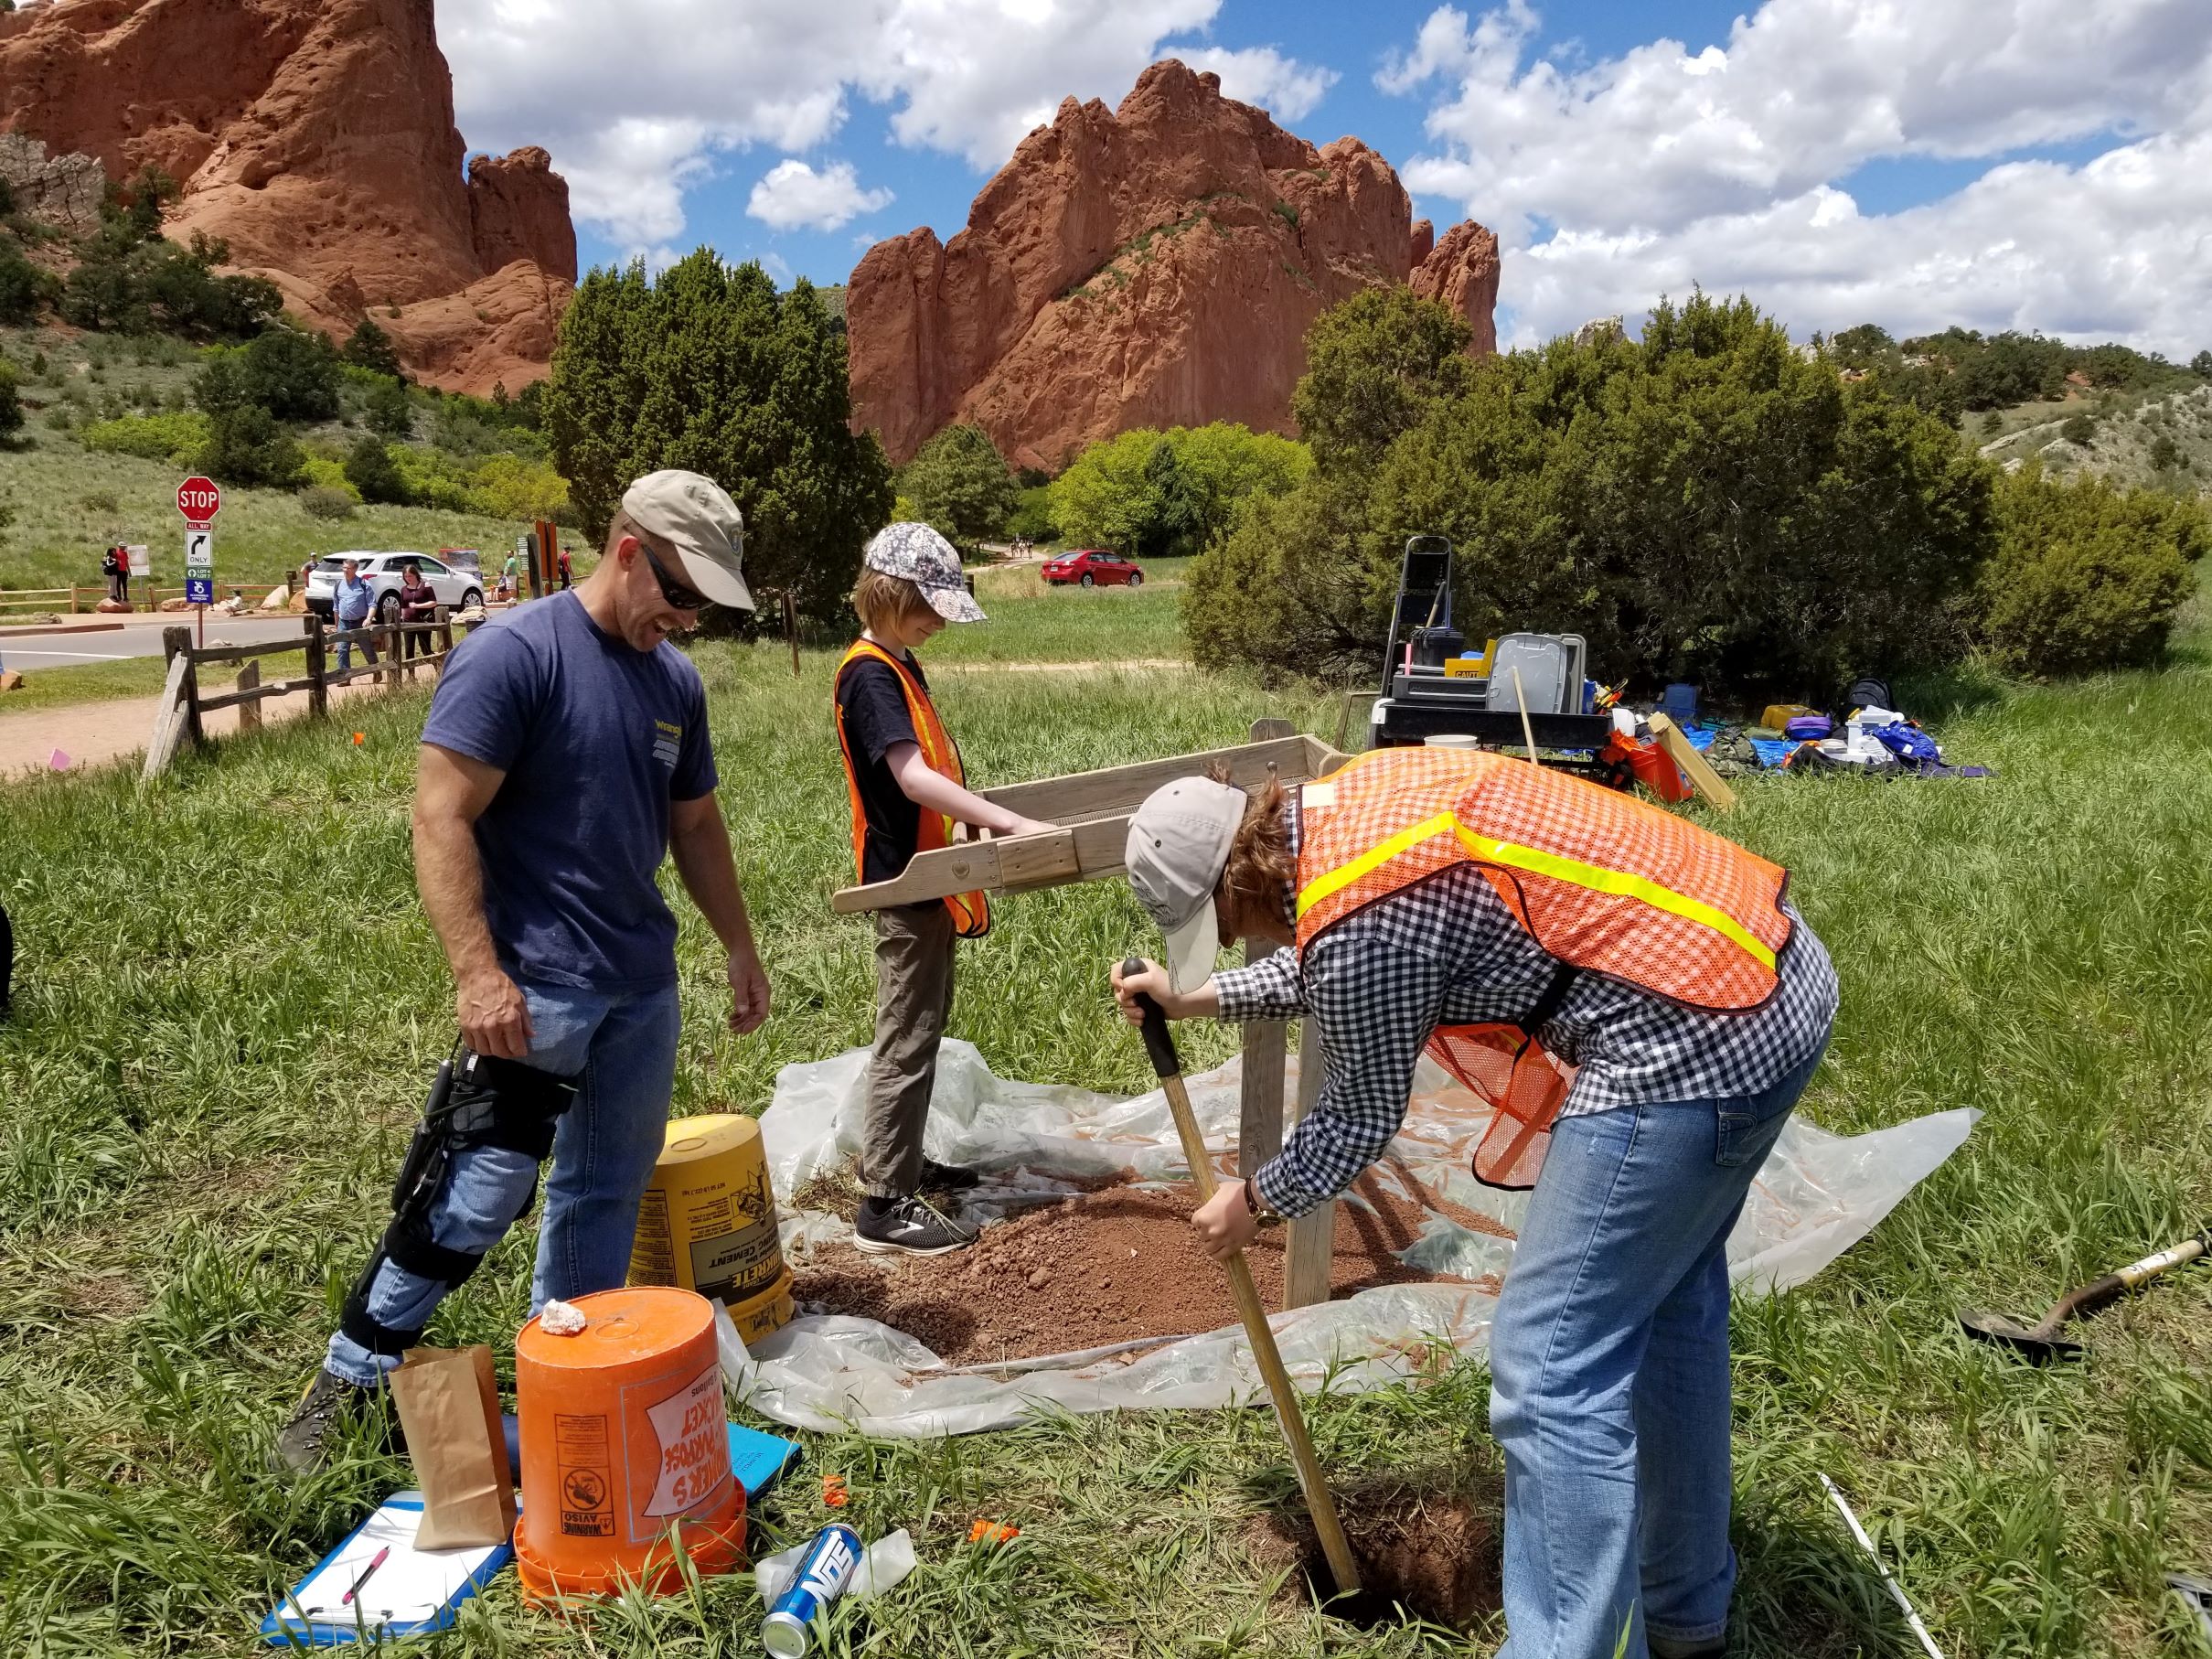 Students excavating at Garden of the Gods